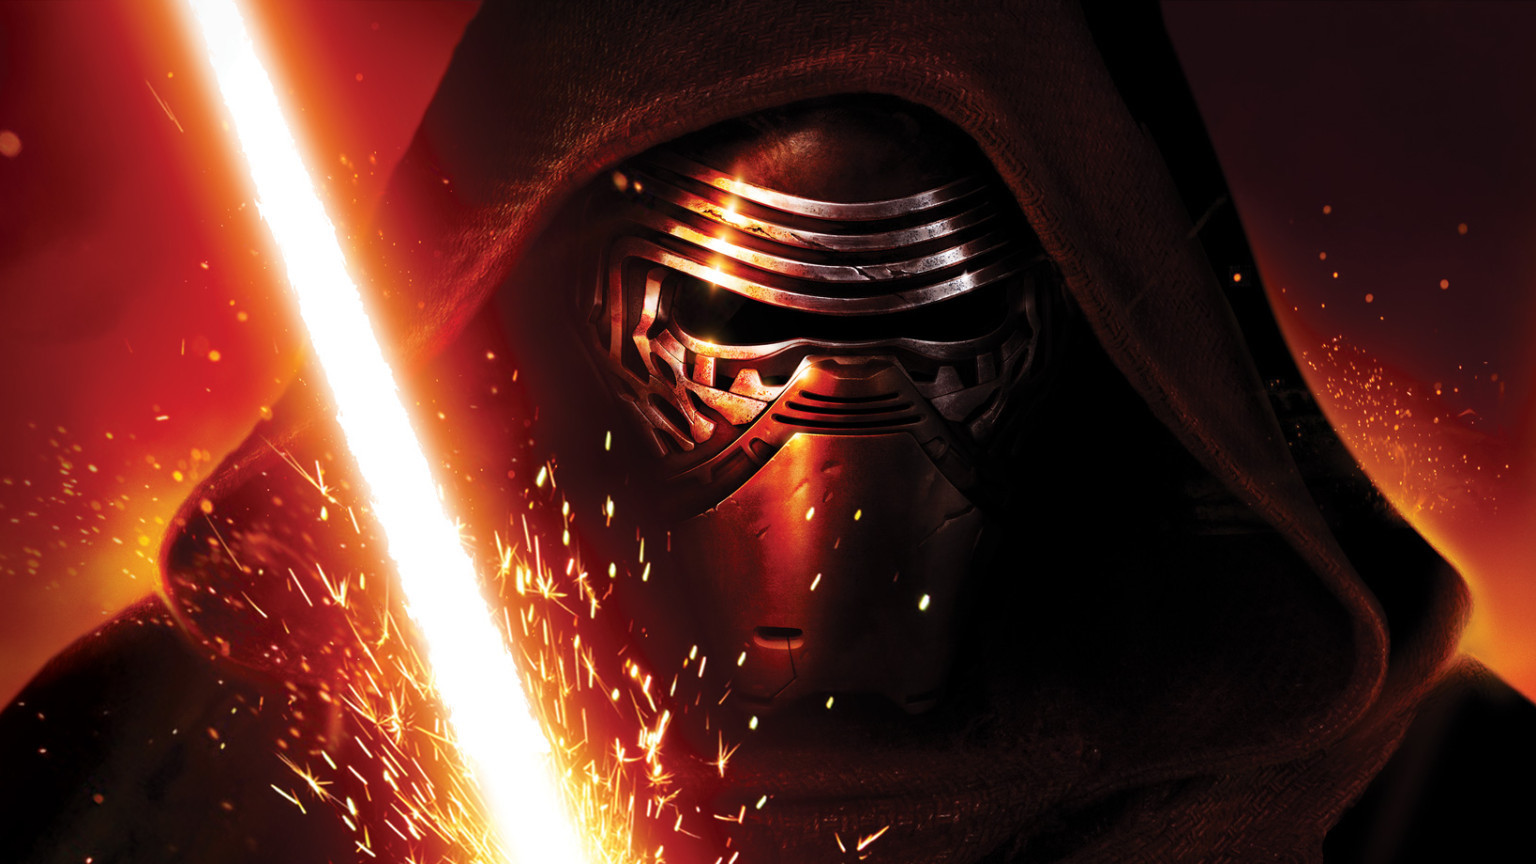 ‘Star Wars: The Force Awakens’ Products to be Unveiled Via Live Stream 9/3